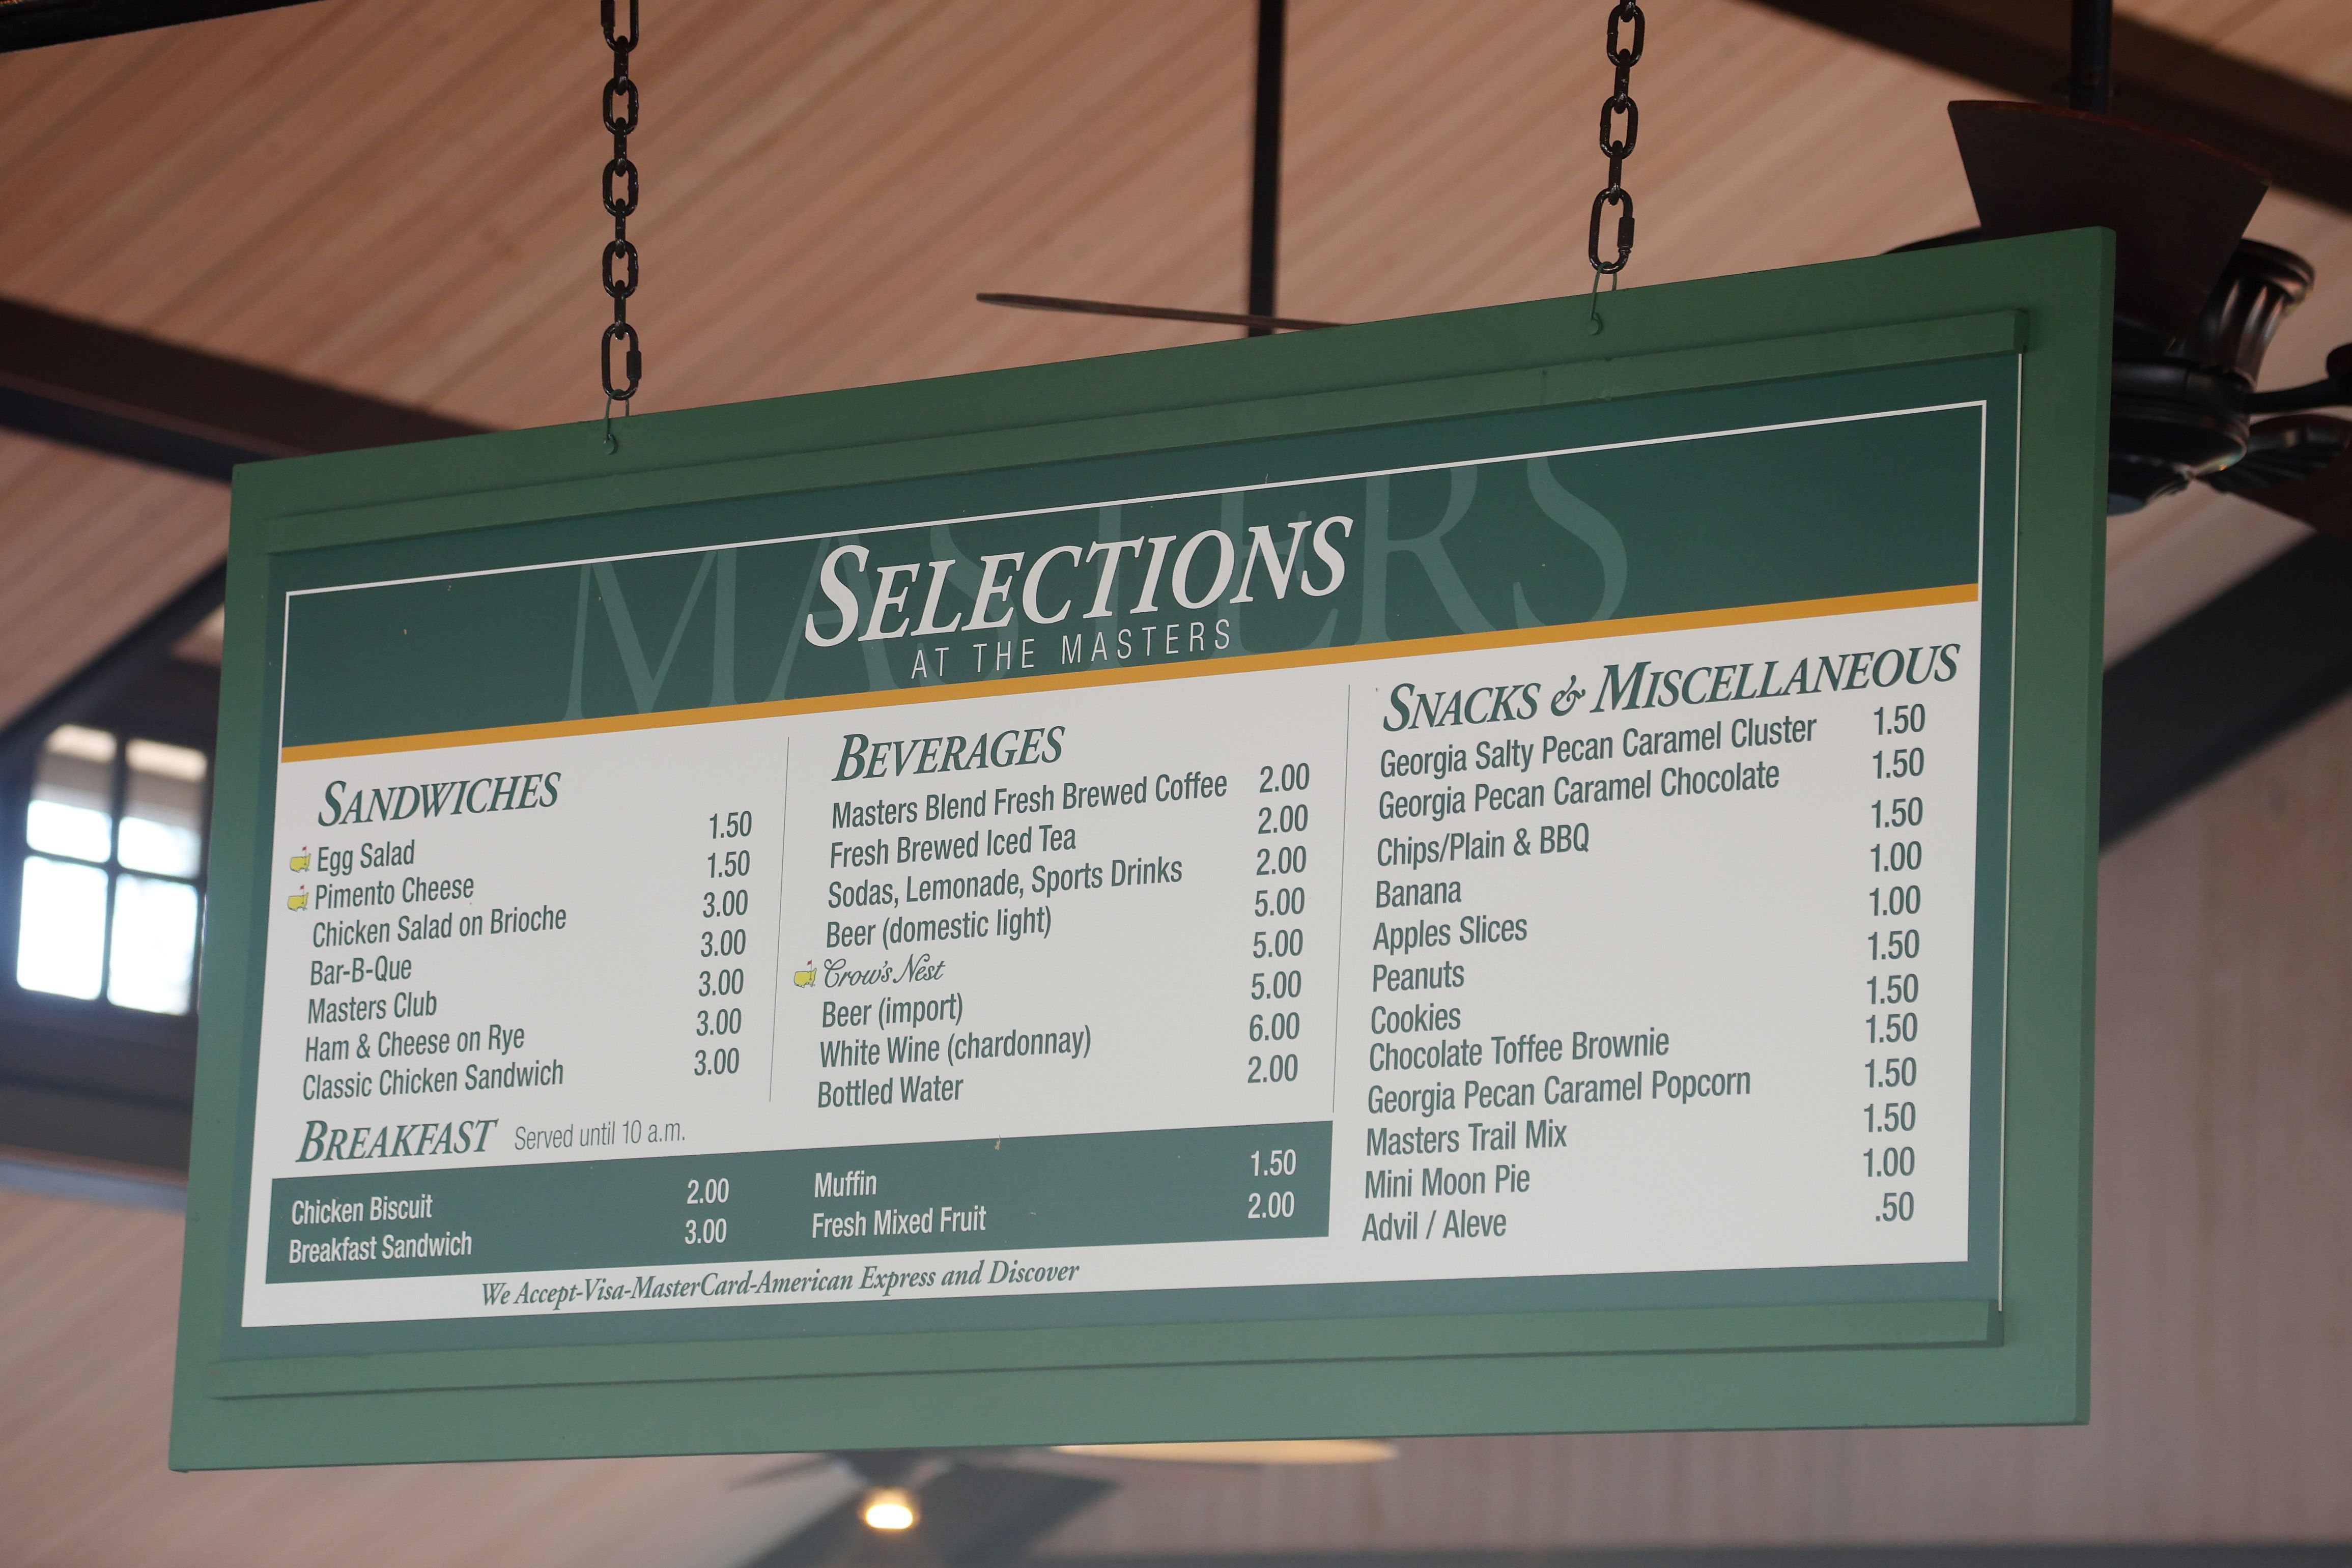 This year's Masters concession menu